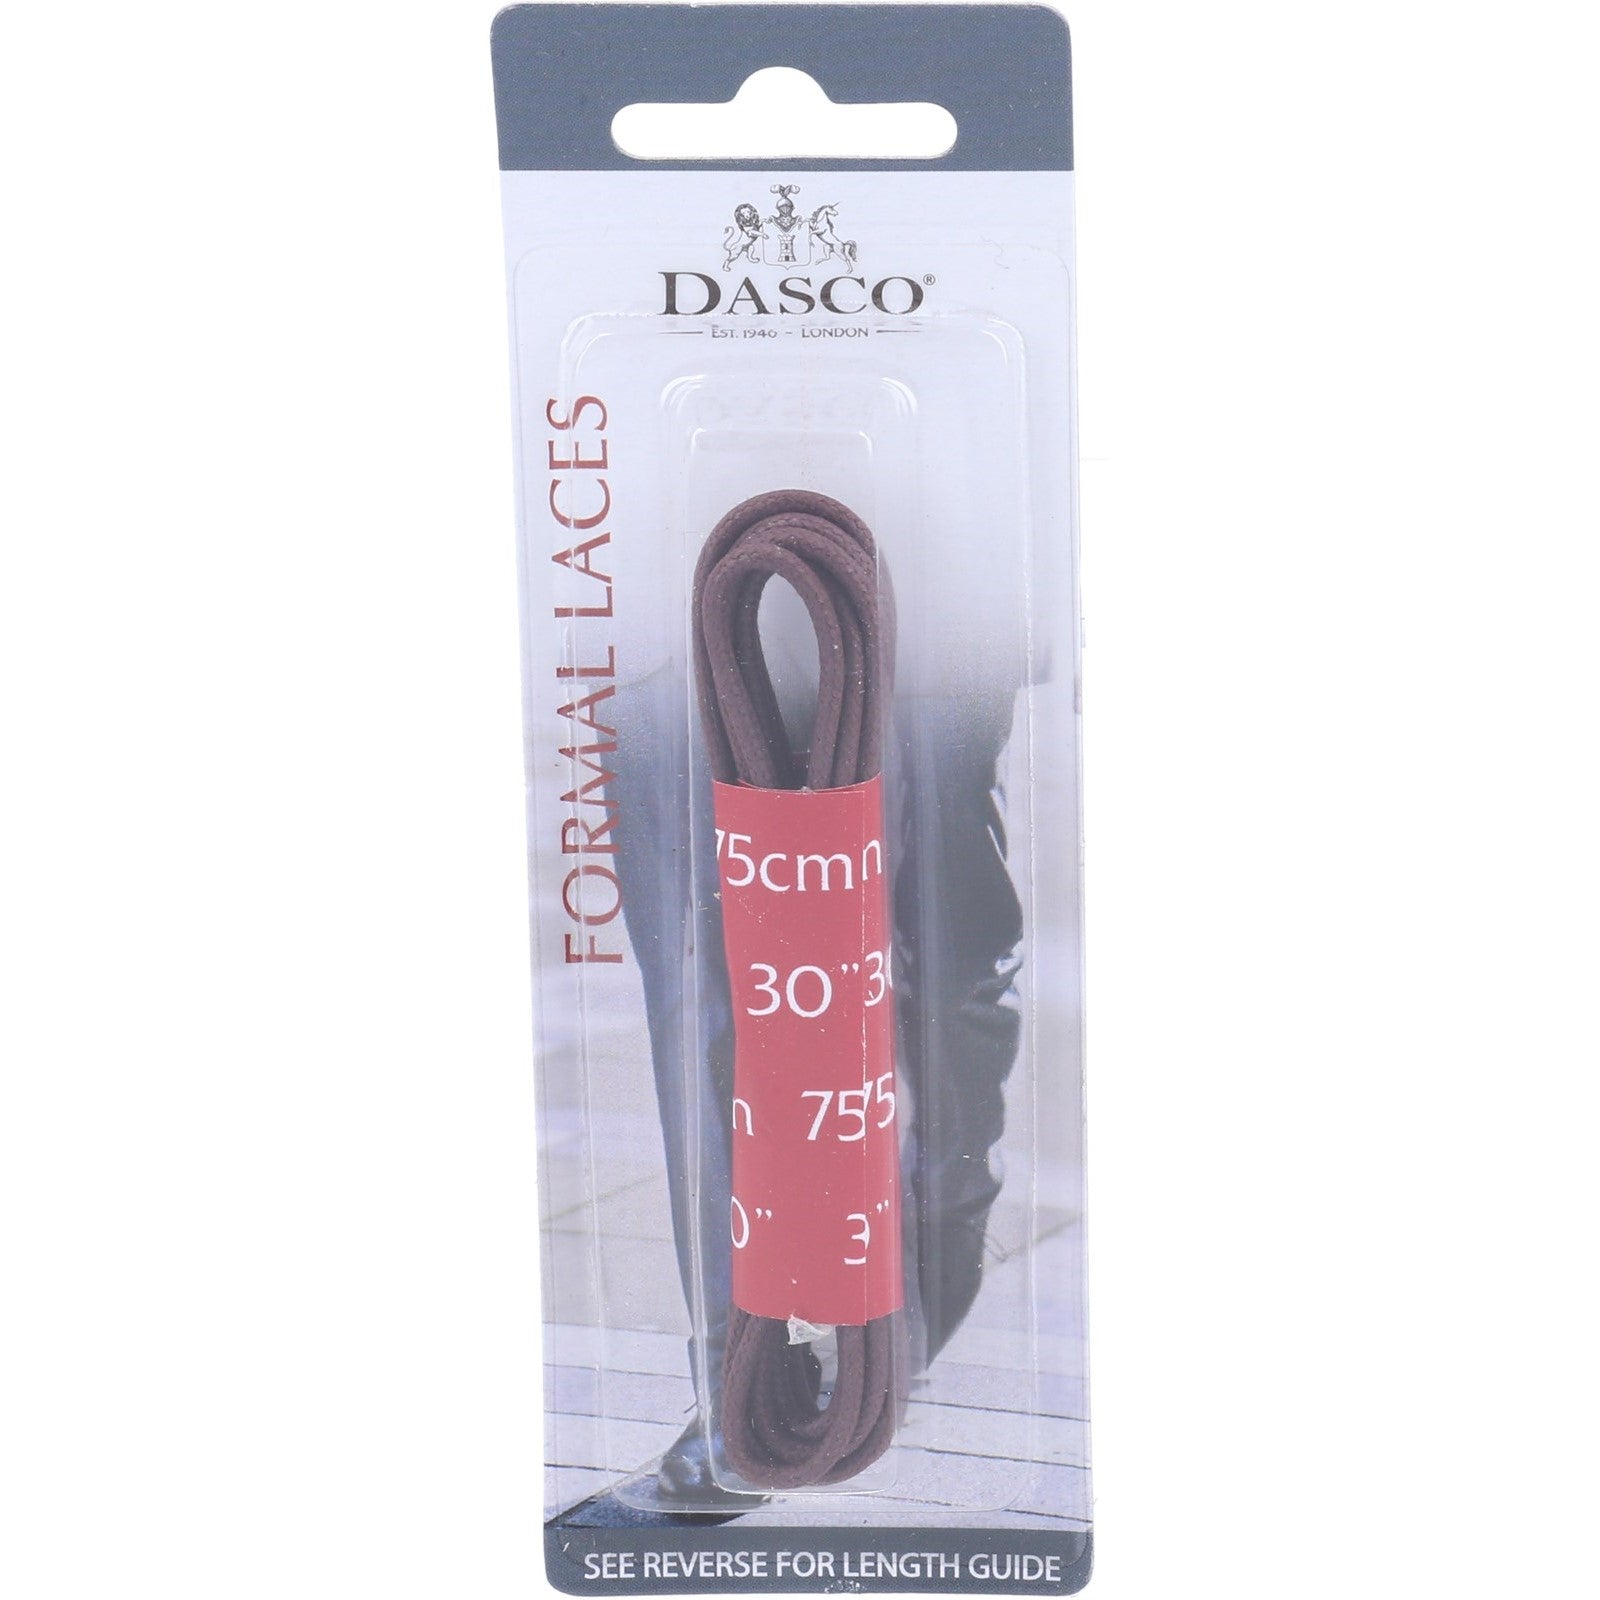 Dasco 75cm Thin Round Waxed Lace 6 Pack